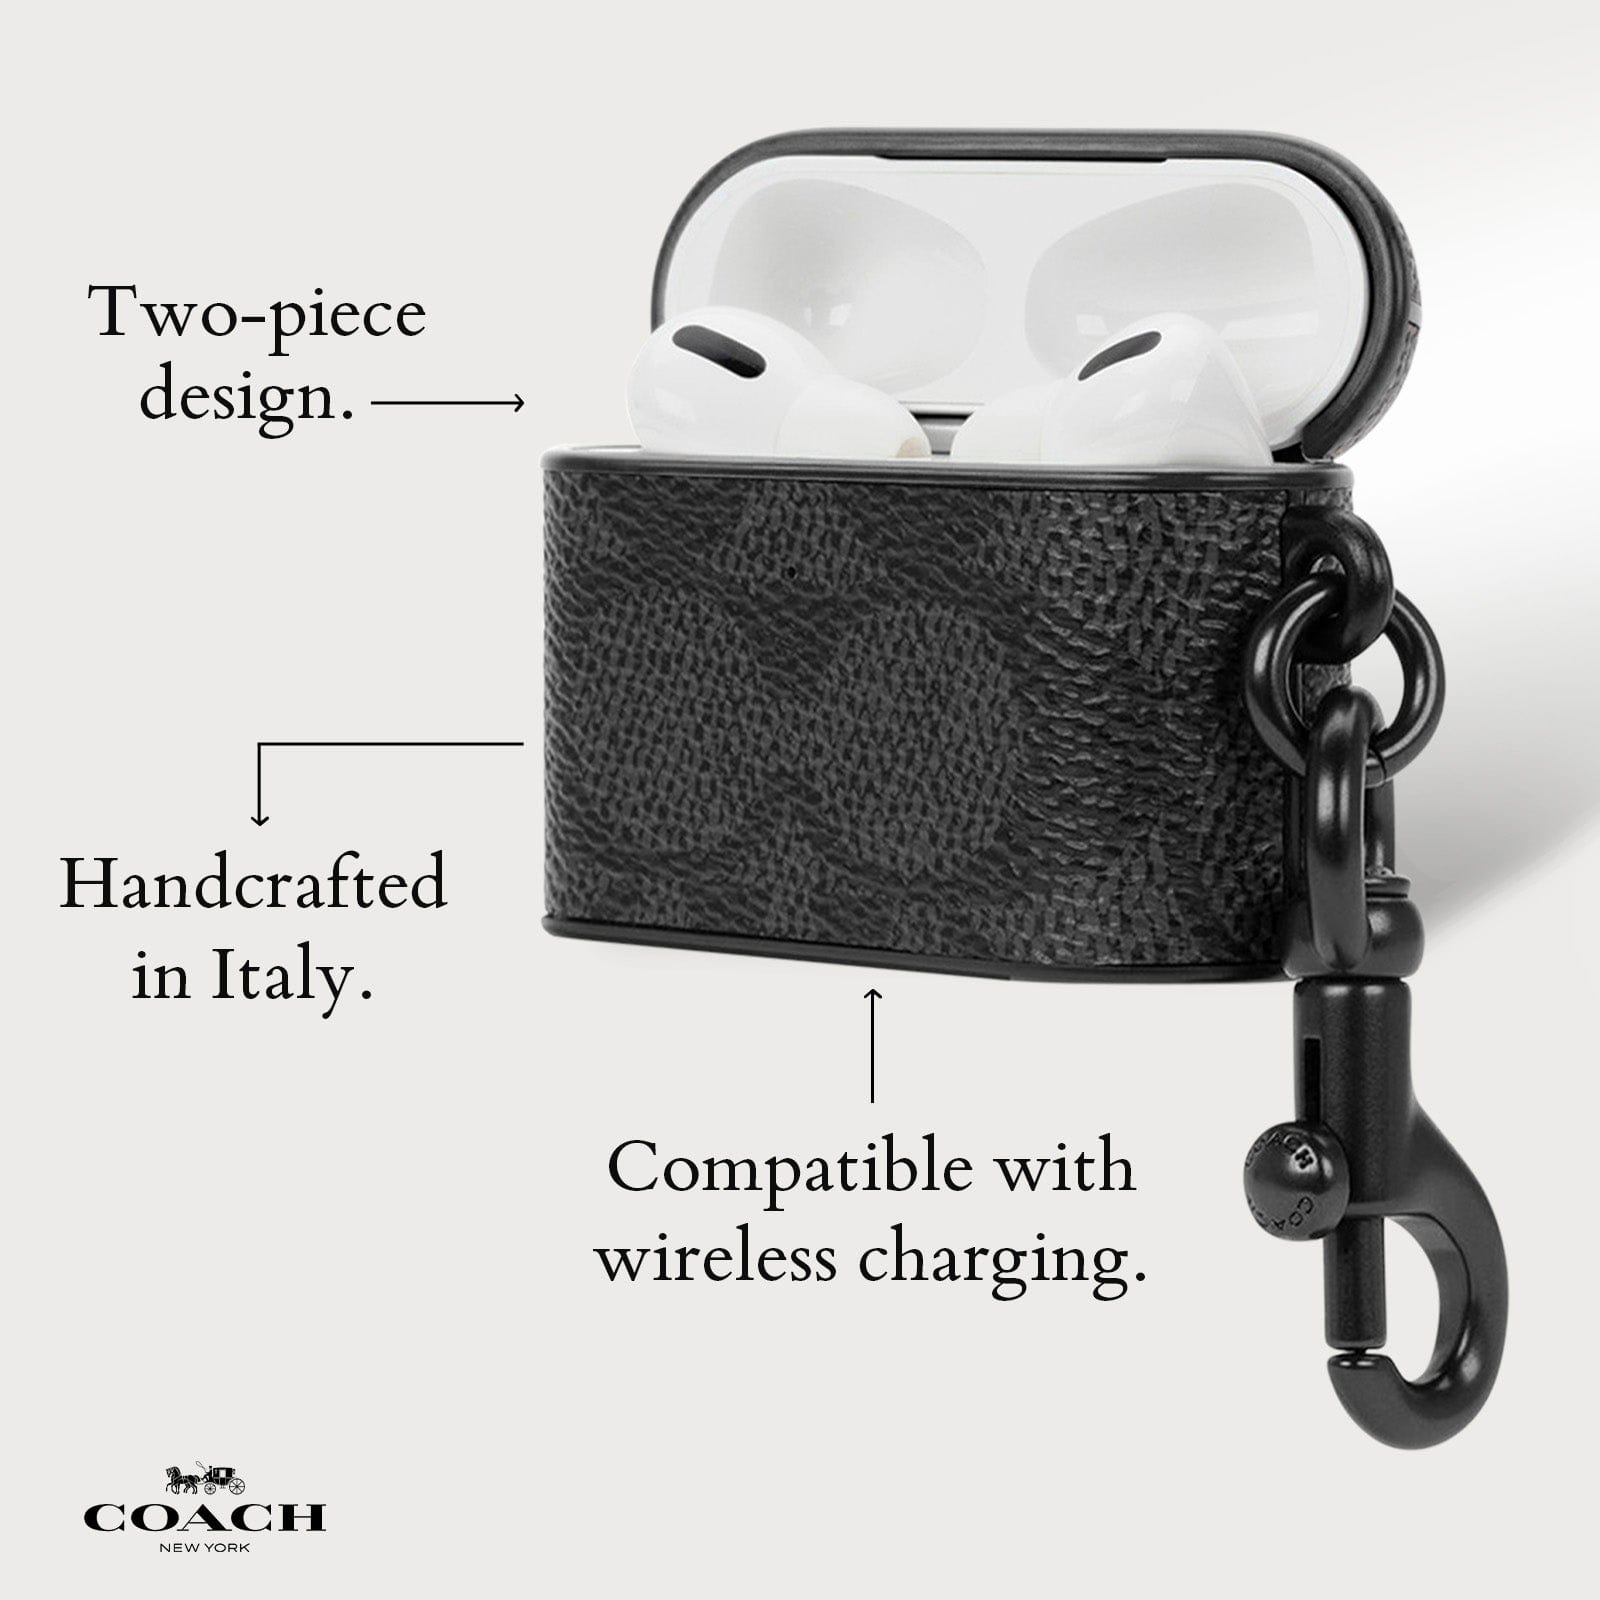 TWO PIECE DESIGN. HANDCRAFTED IN ITALY. COMPATIBLE WITH WIRELESS CHARGING.